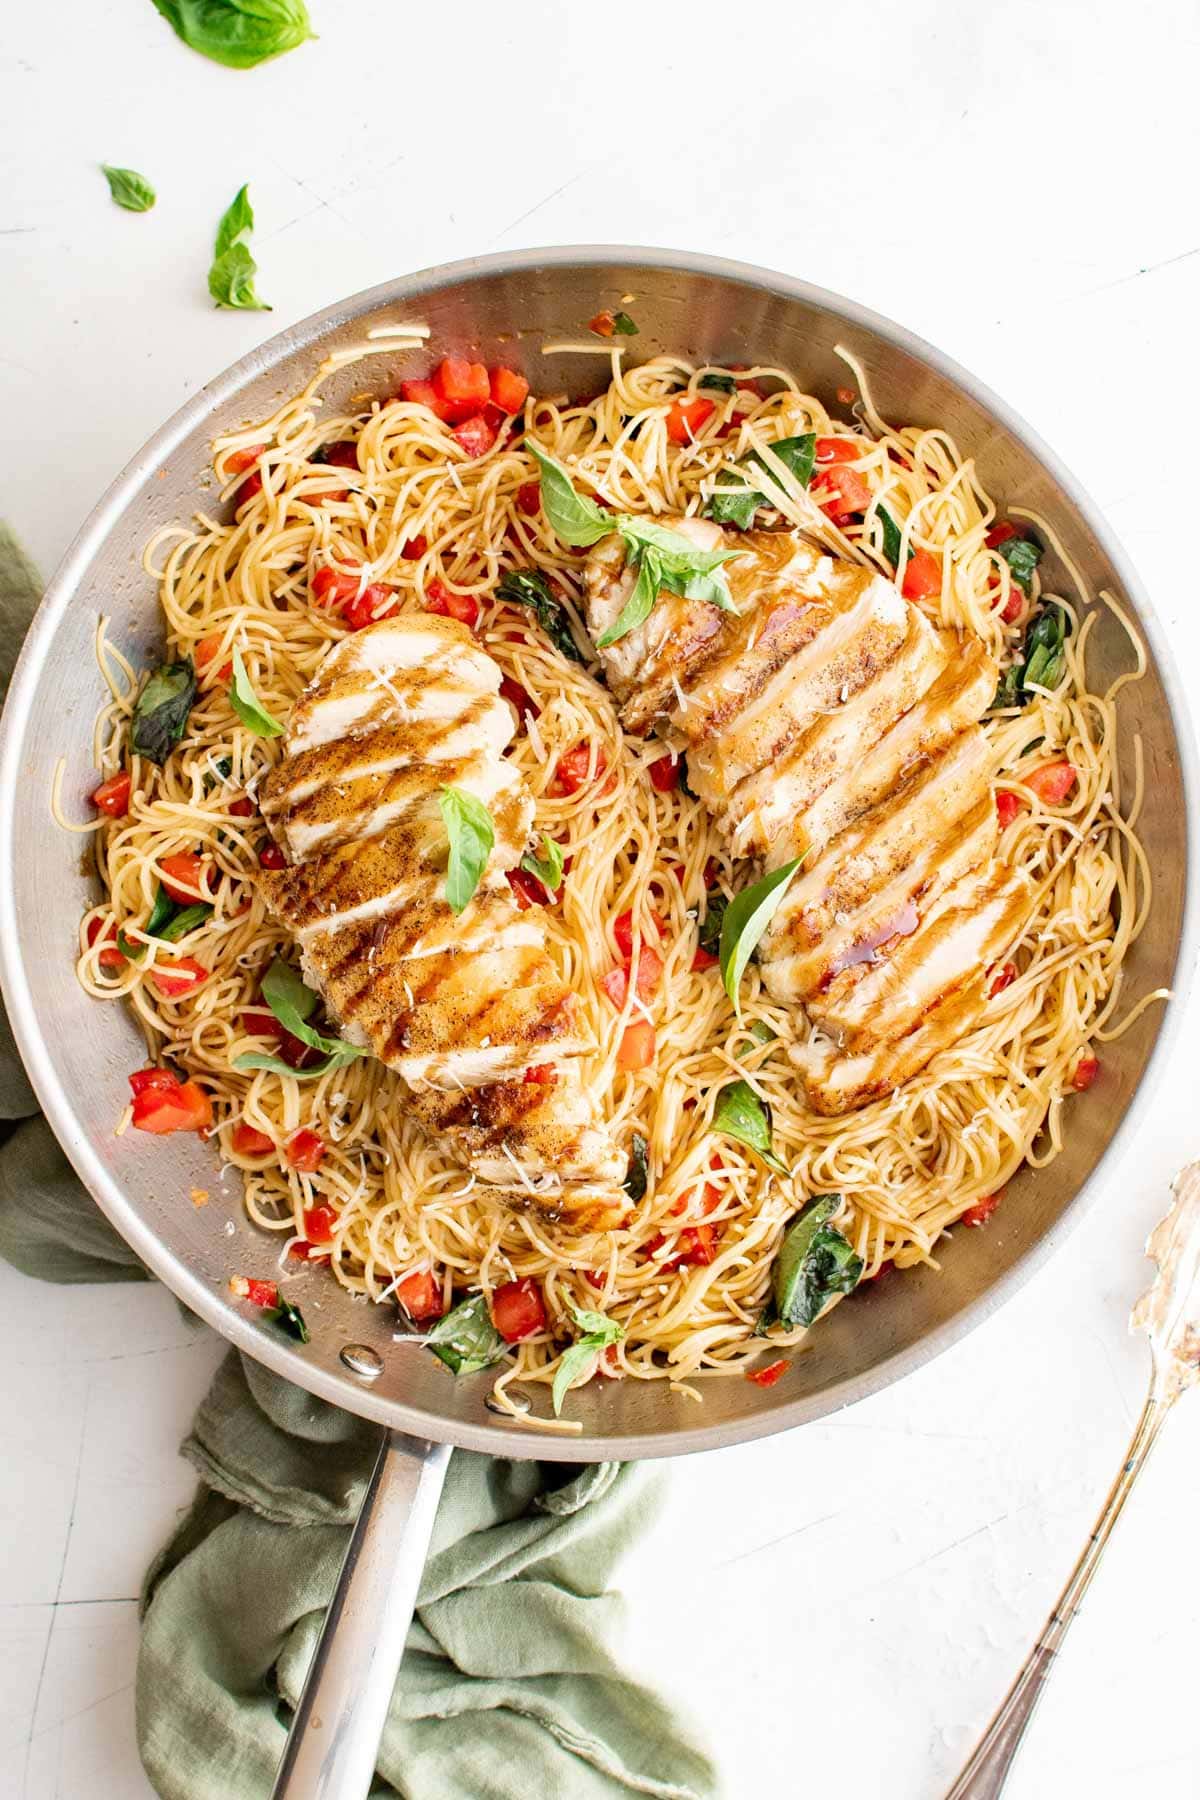 Sliced chicken breast over pasta with tomatoes with balsamic glaze.